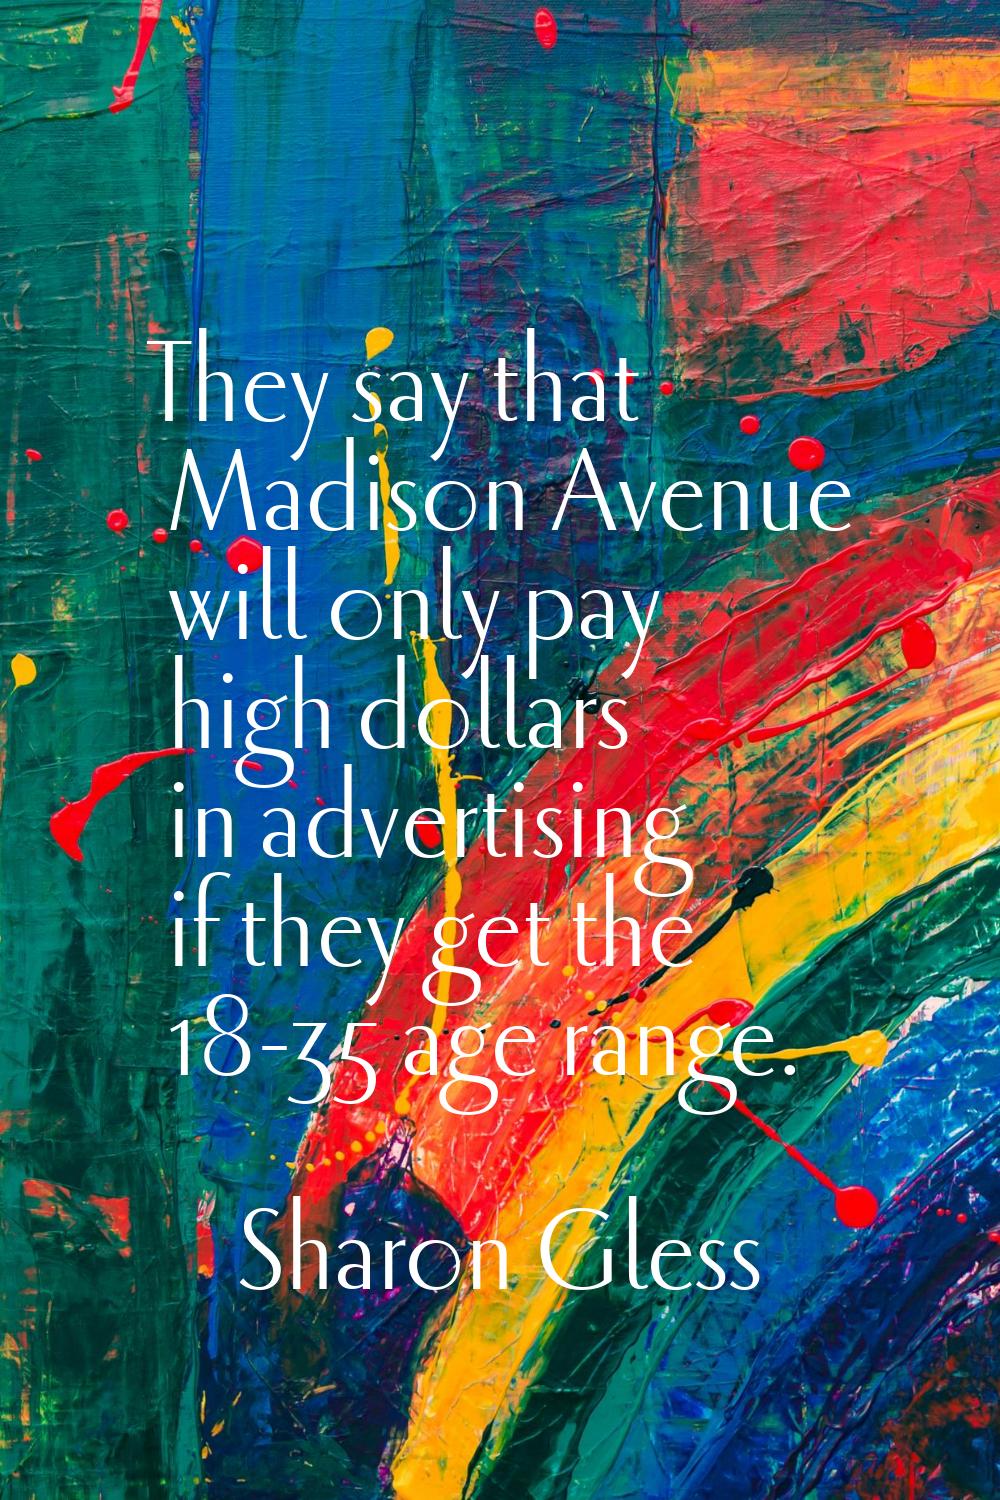 They say that Madison Avenue will only pay high dollars in advertising if they get the 18-35 age ra